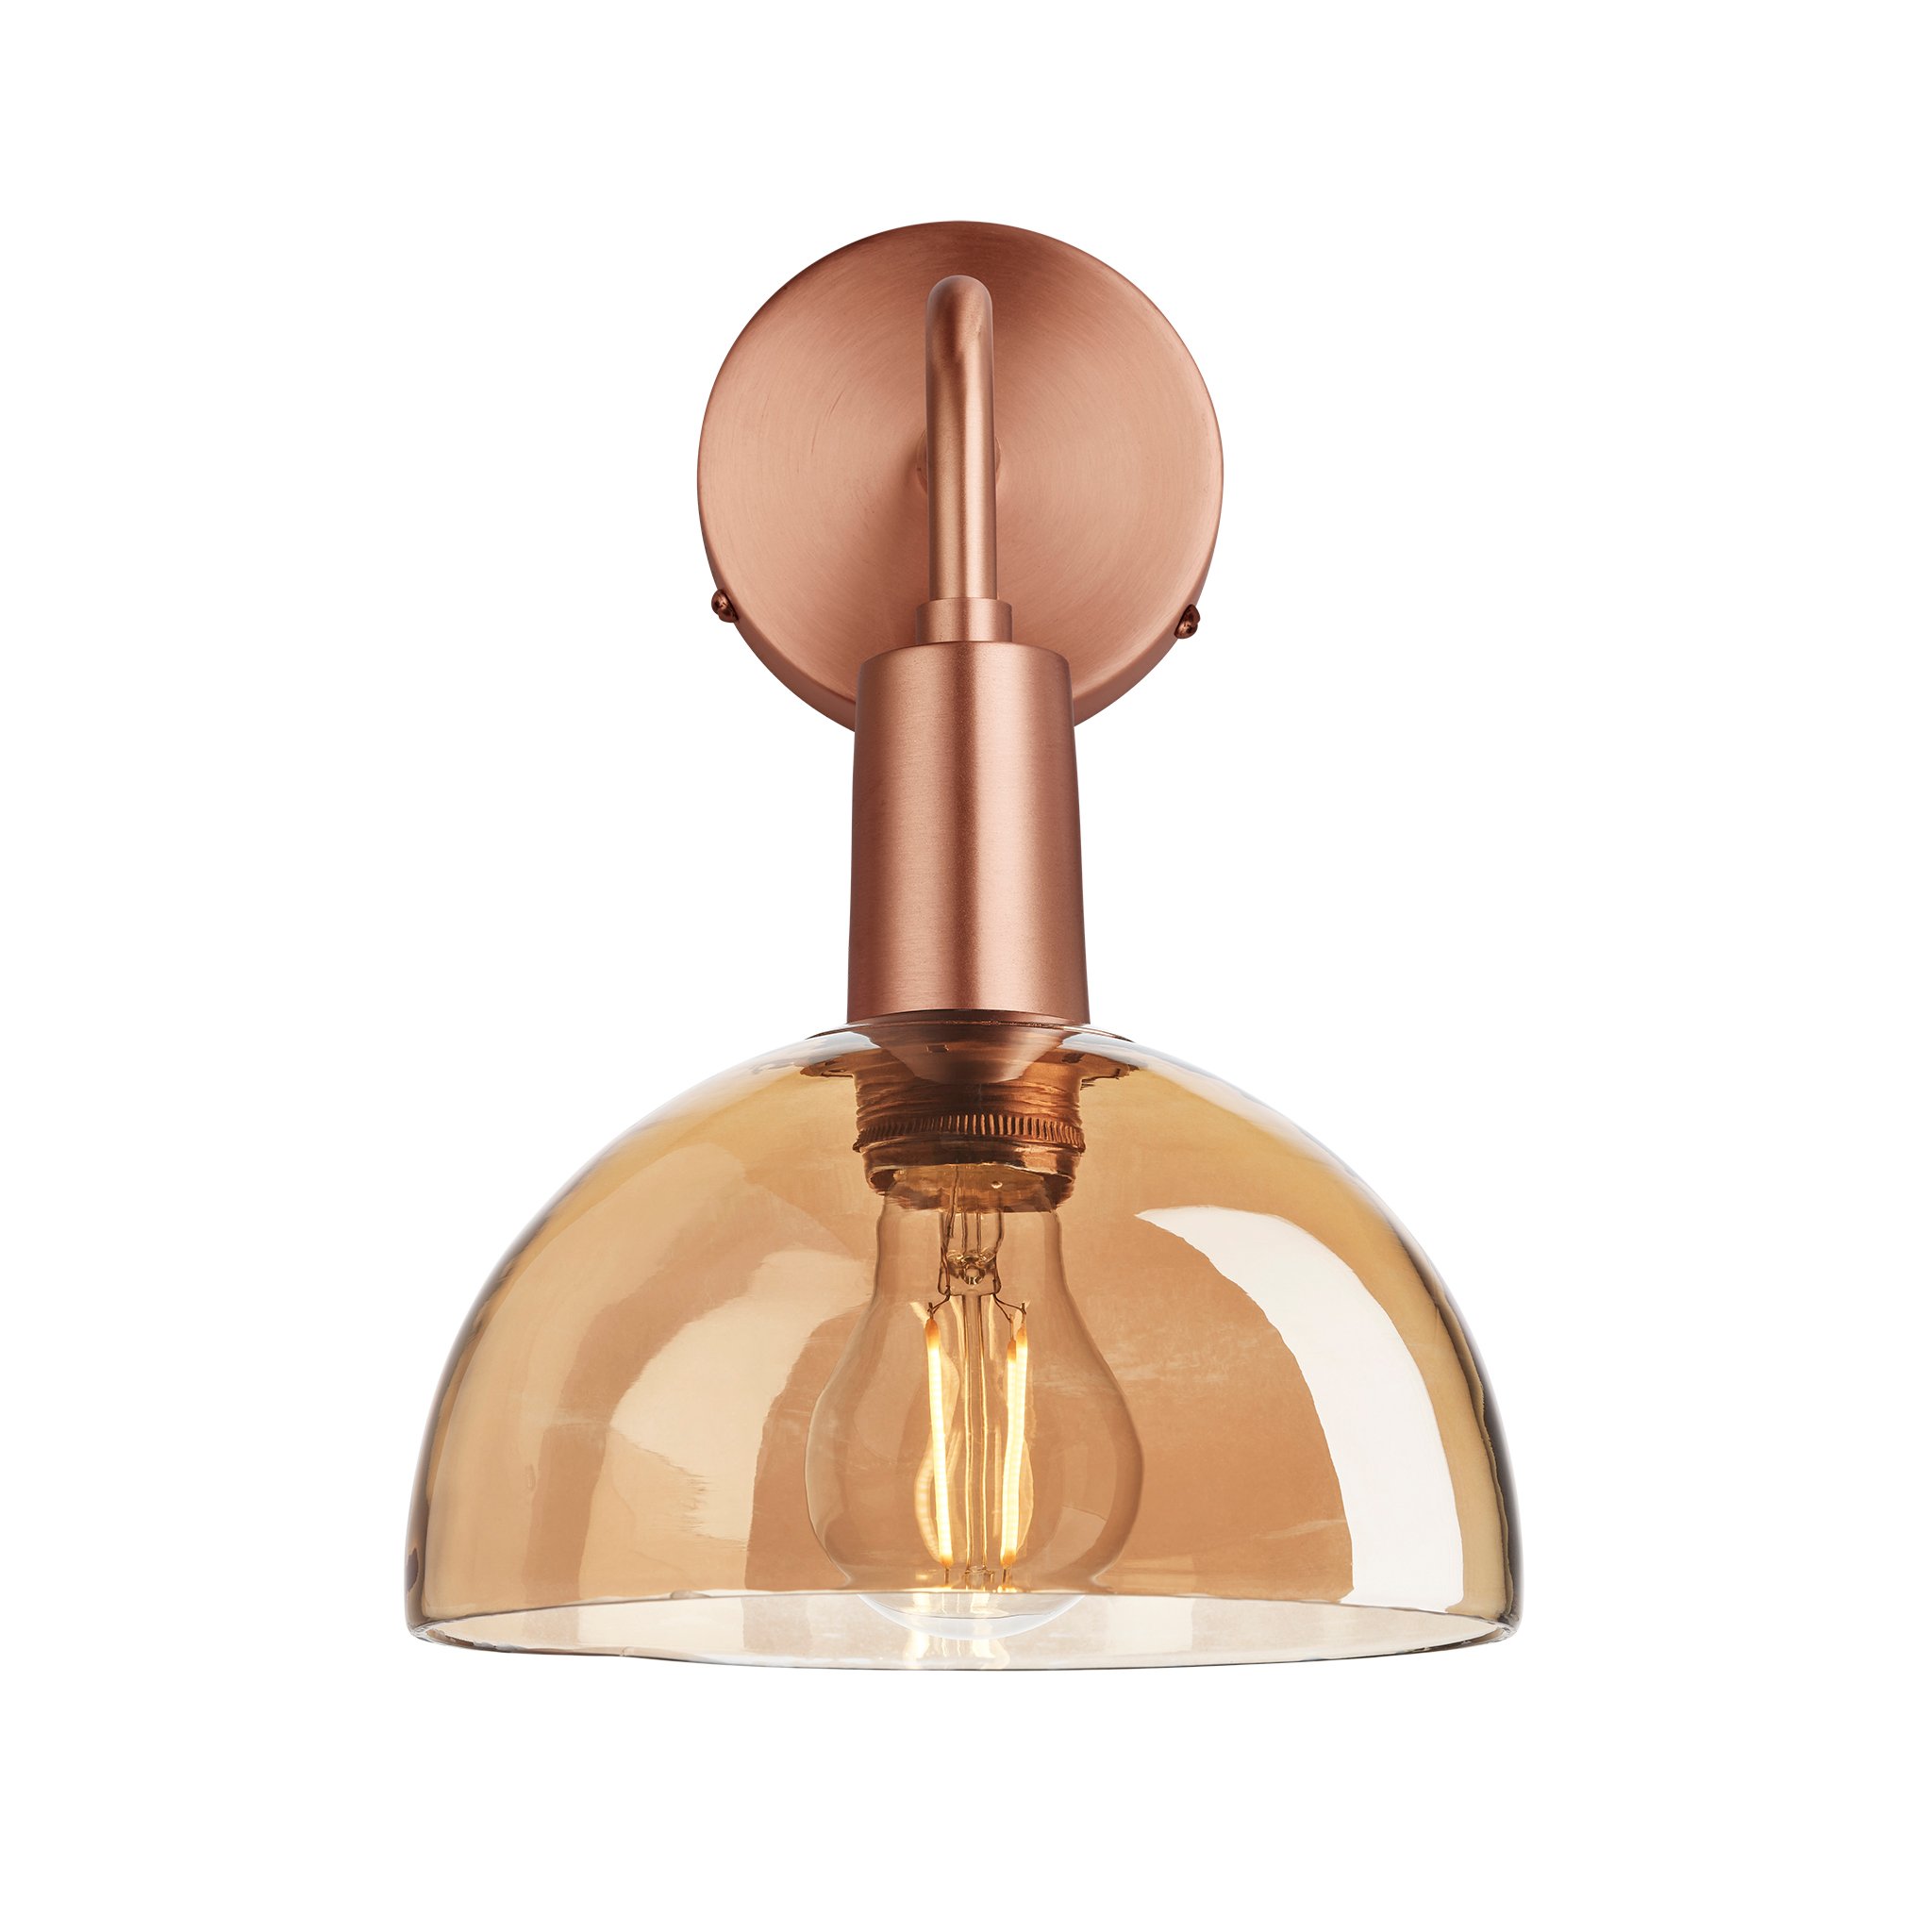 Brooklyn Tinted Glass Dome Wall Light - 8 Inch - Amber - Copper Holder